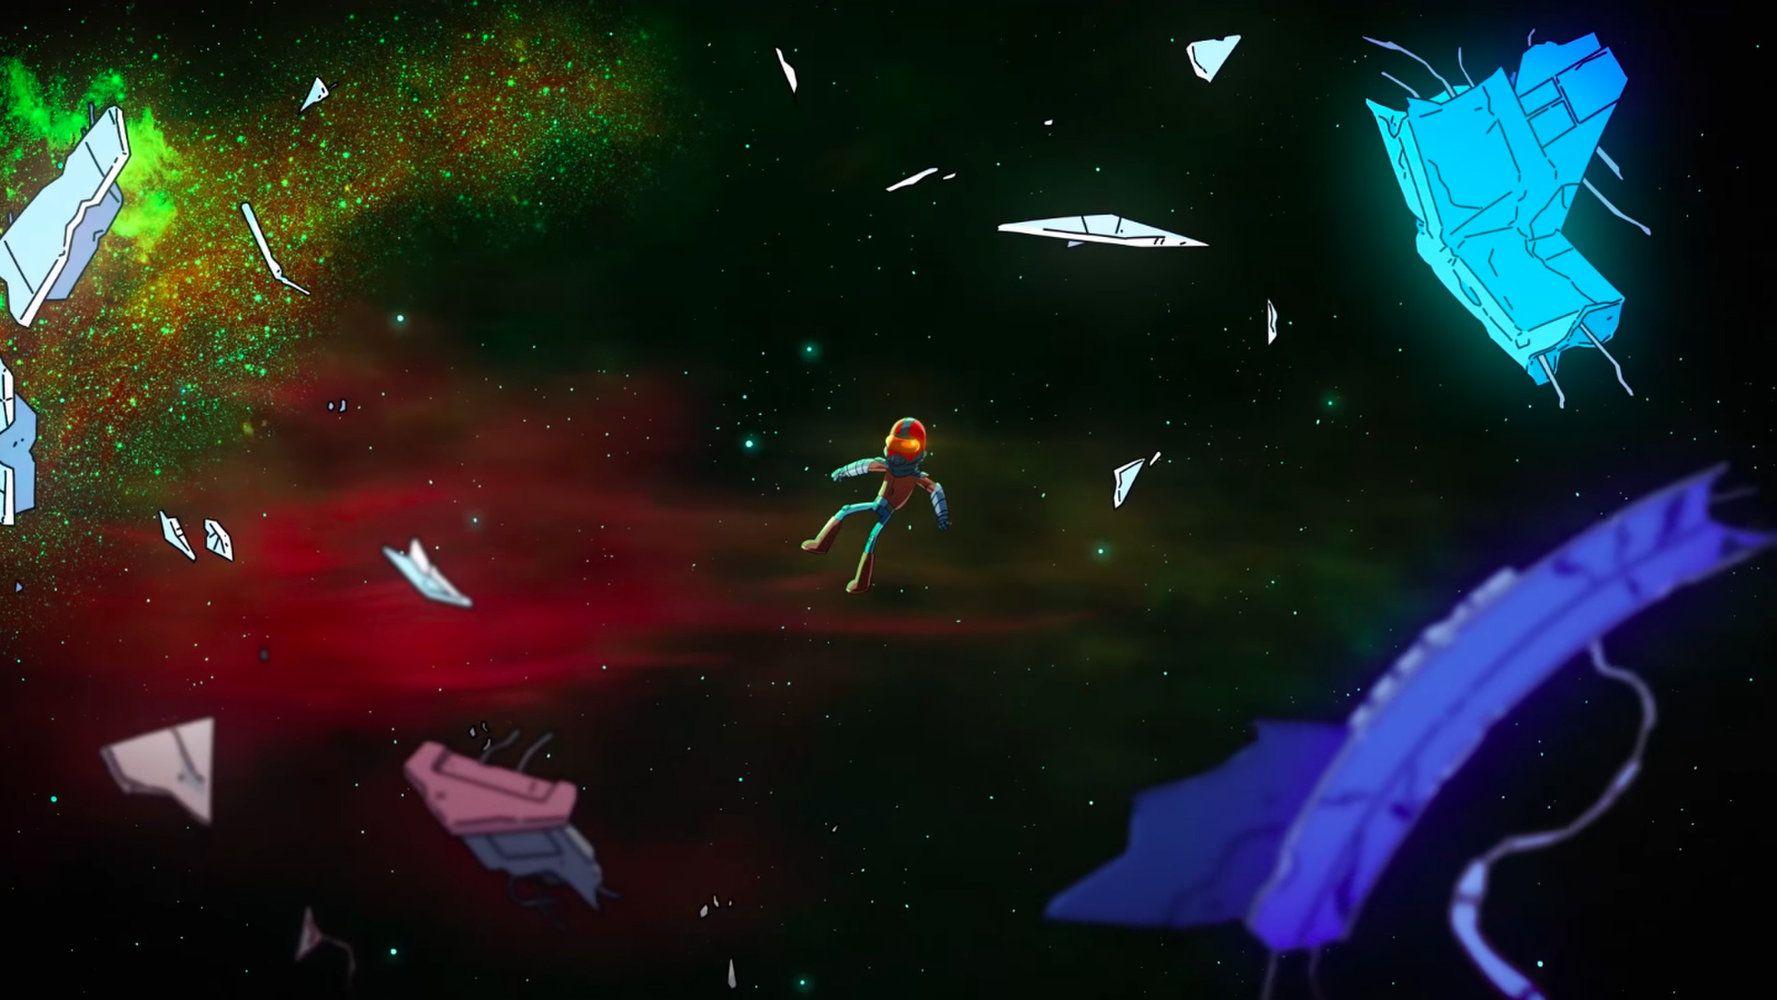 Animated Comedy Series 'Final Space' Coming to TBS in 2018: Watch